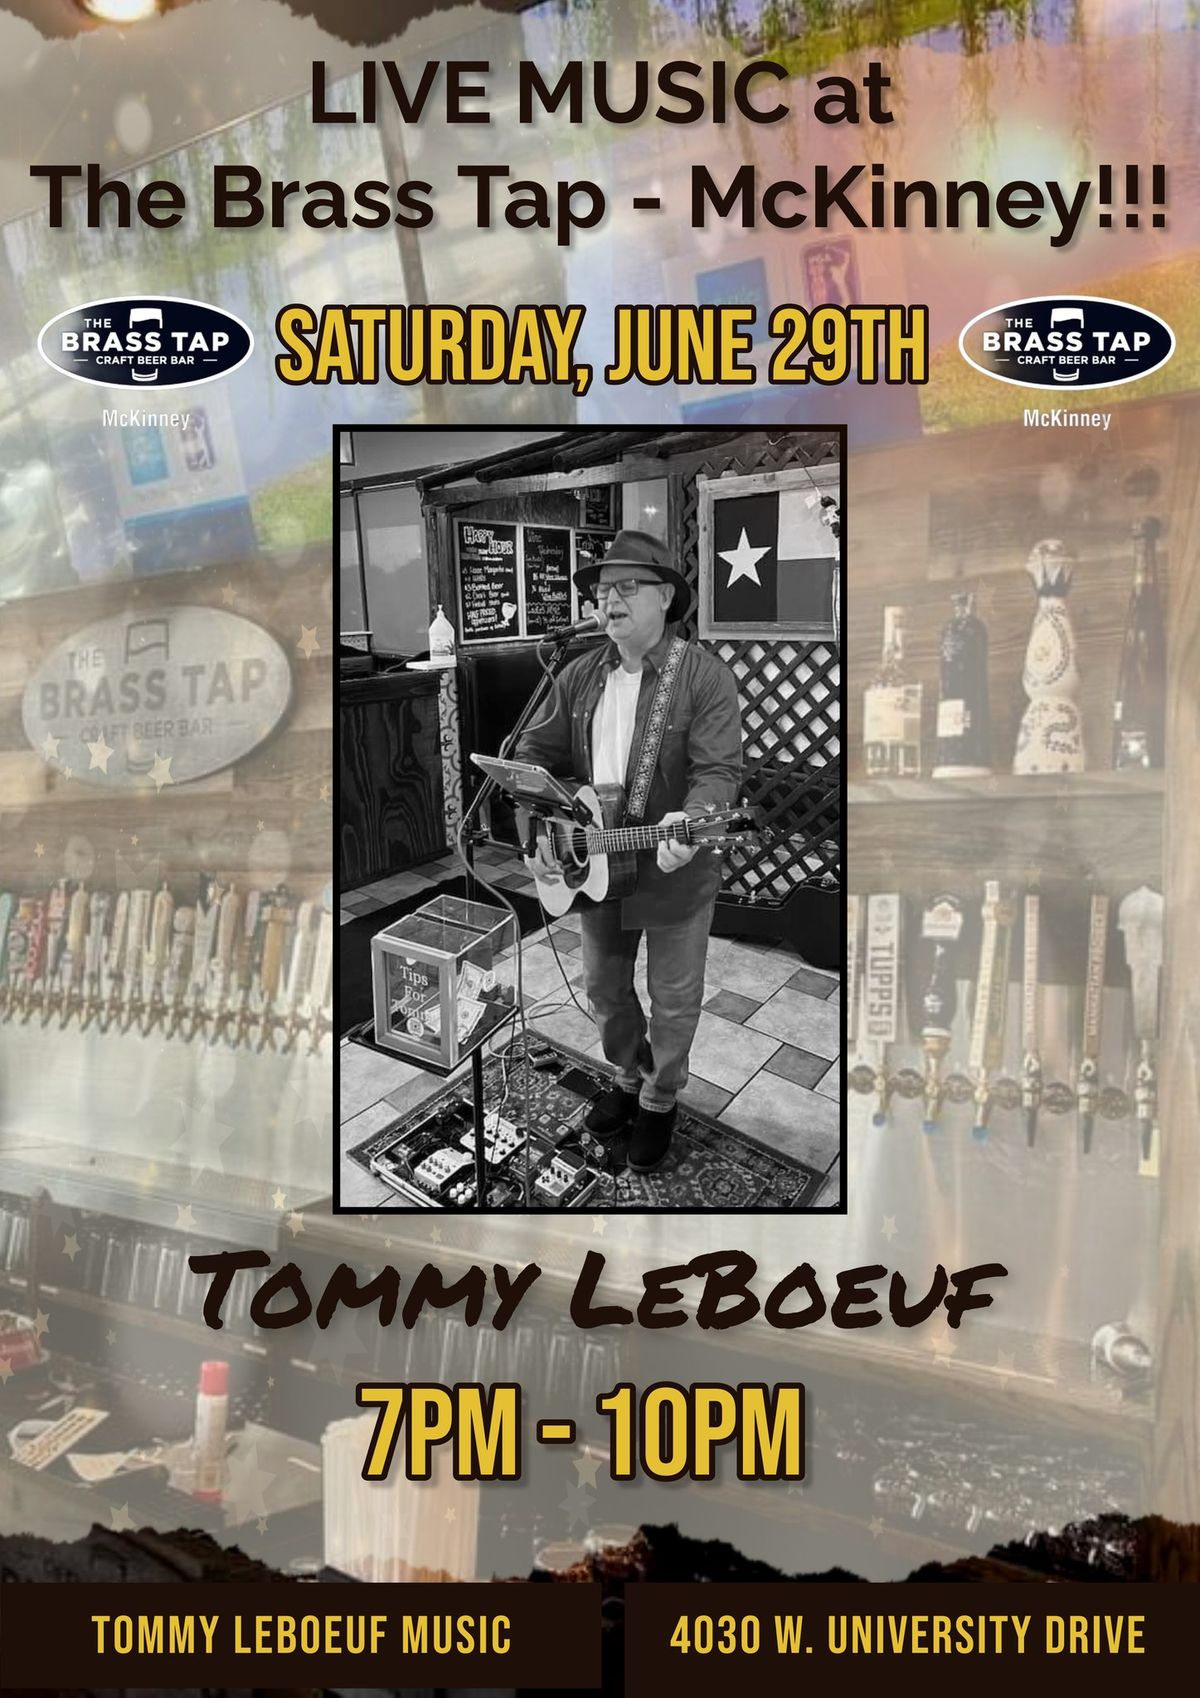 Tommy LeBoeuf LIVE at The Brass Tap - McKinney!